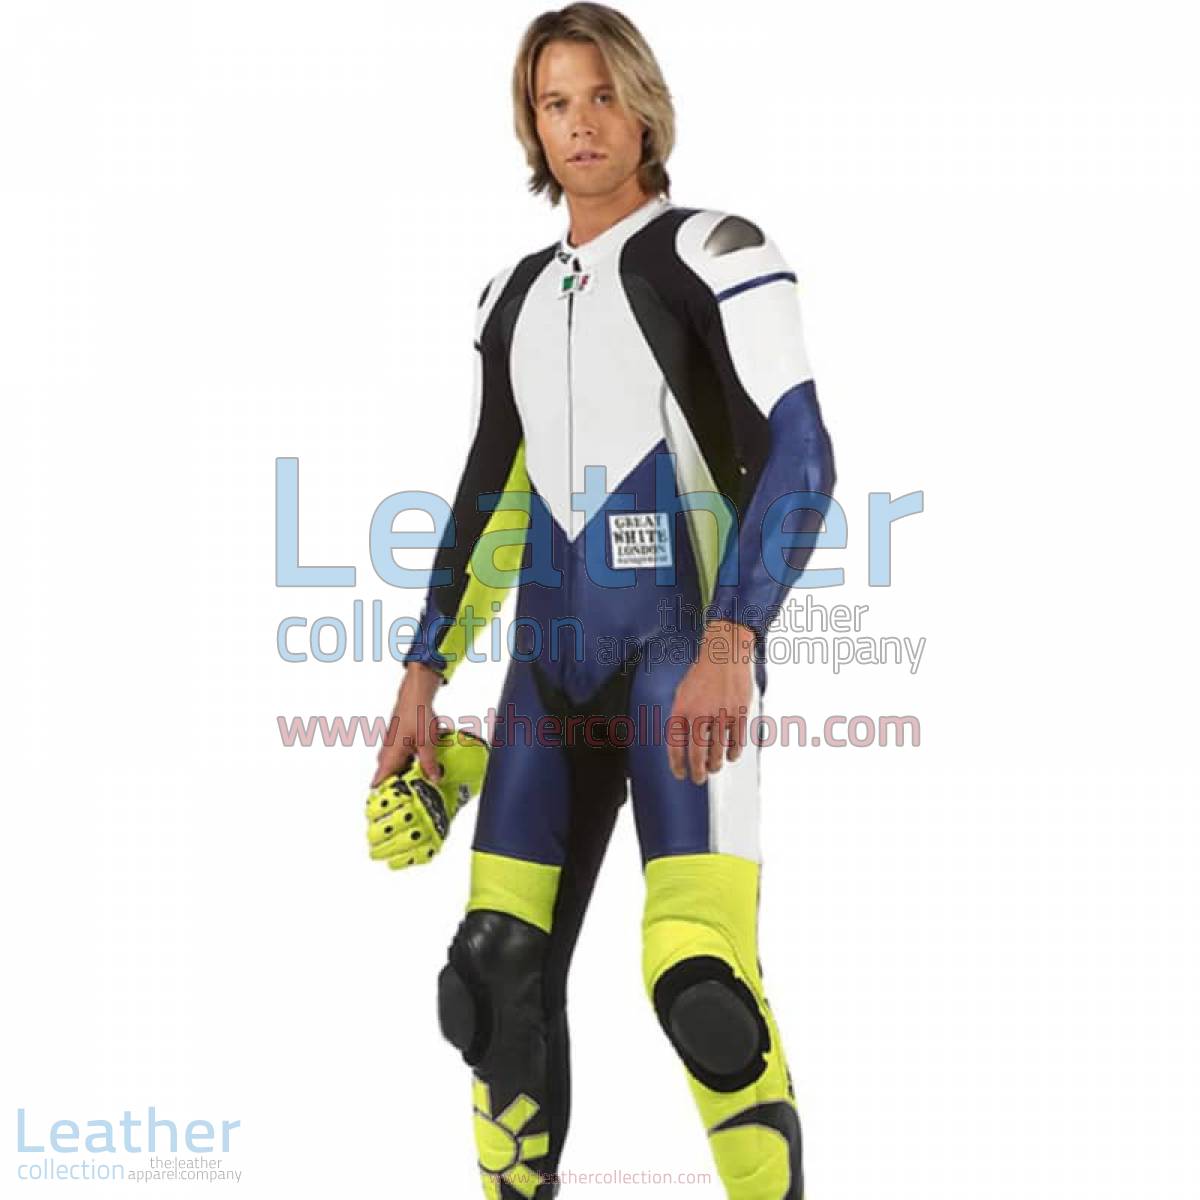 VR46 Racing Leather Suit | vr46